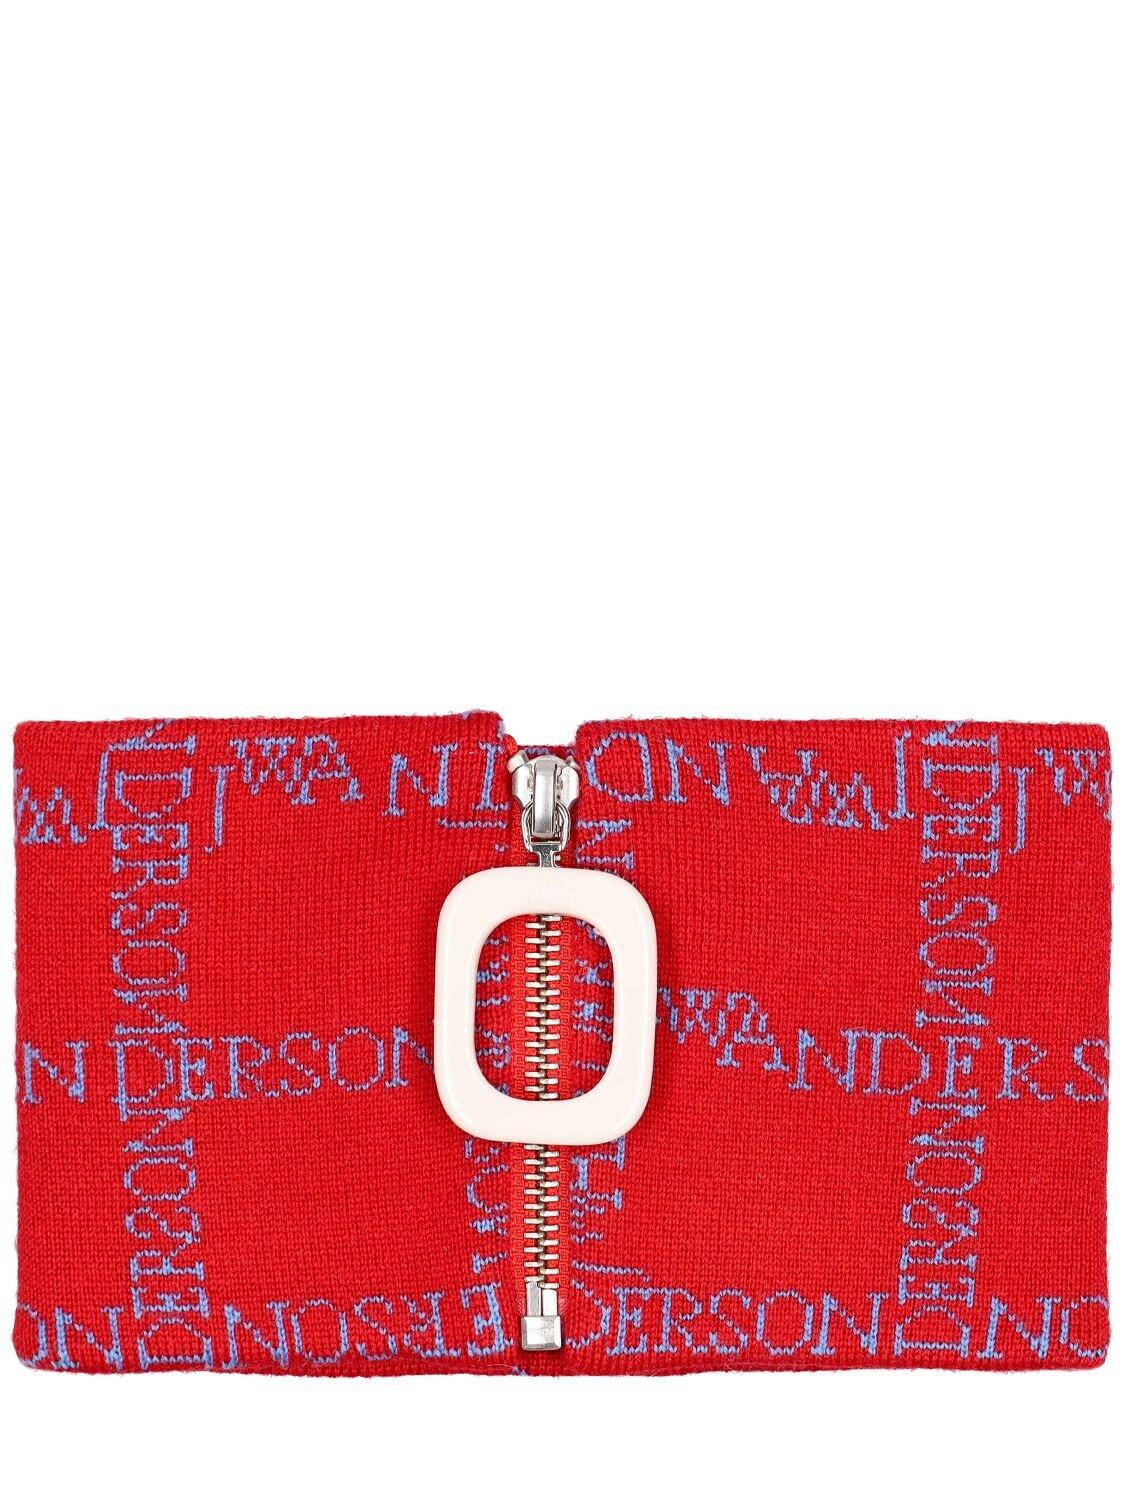 JW Anderson Zip-up Wool Knit Neckband in Red for Men | Lyst